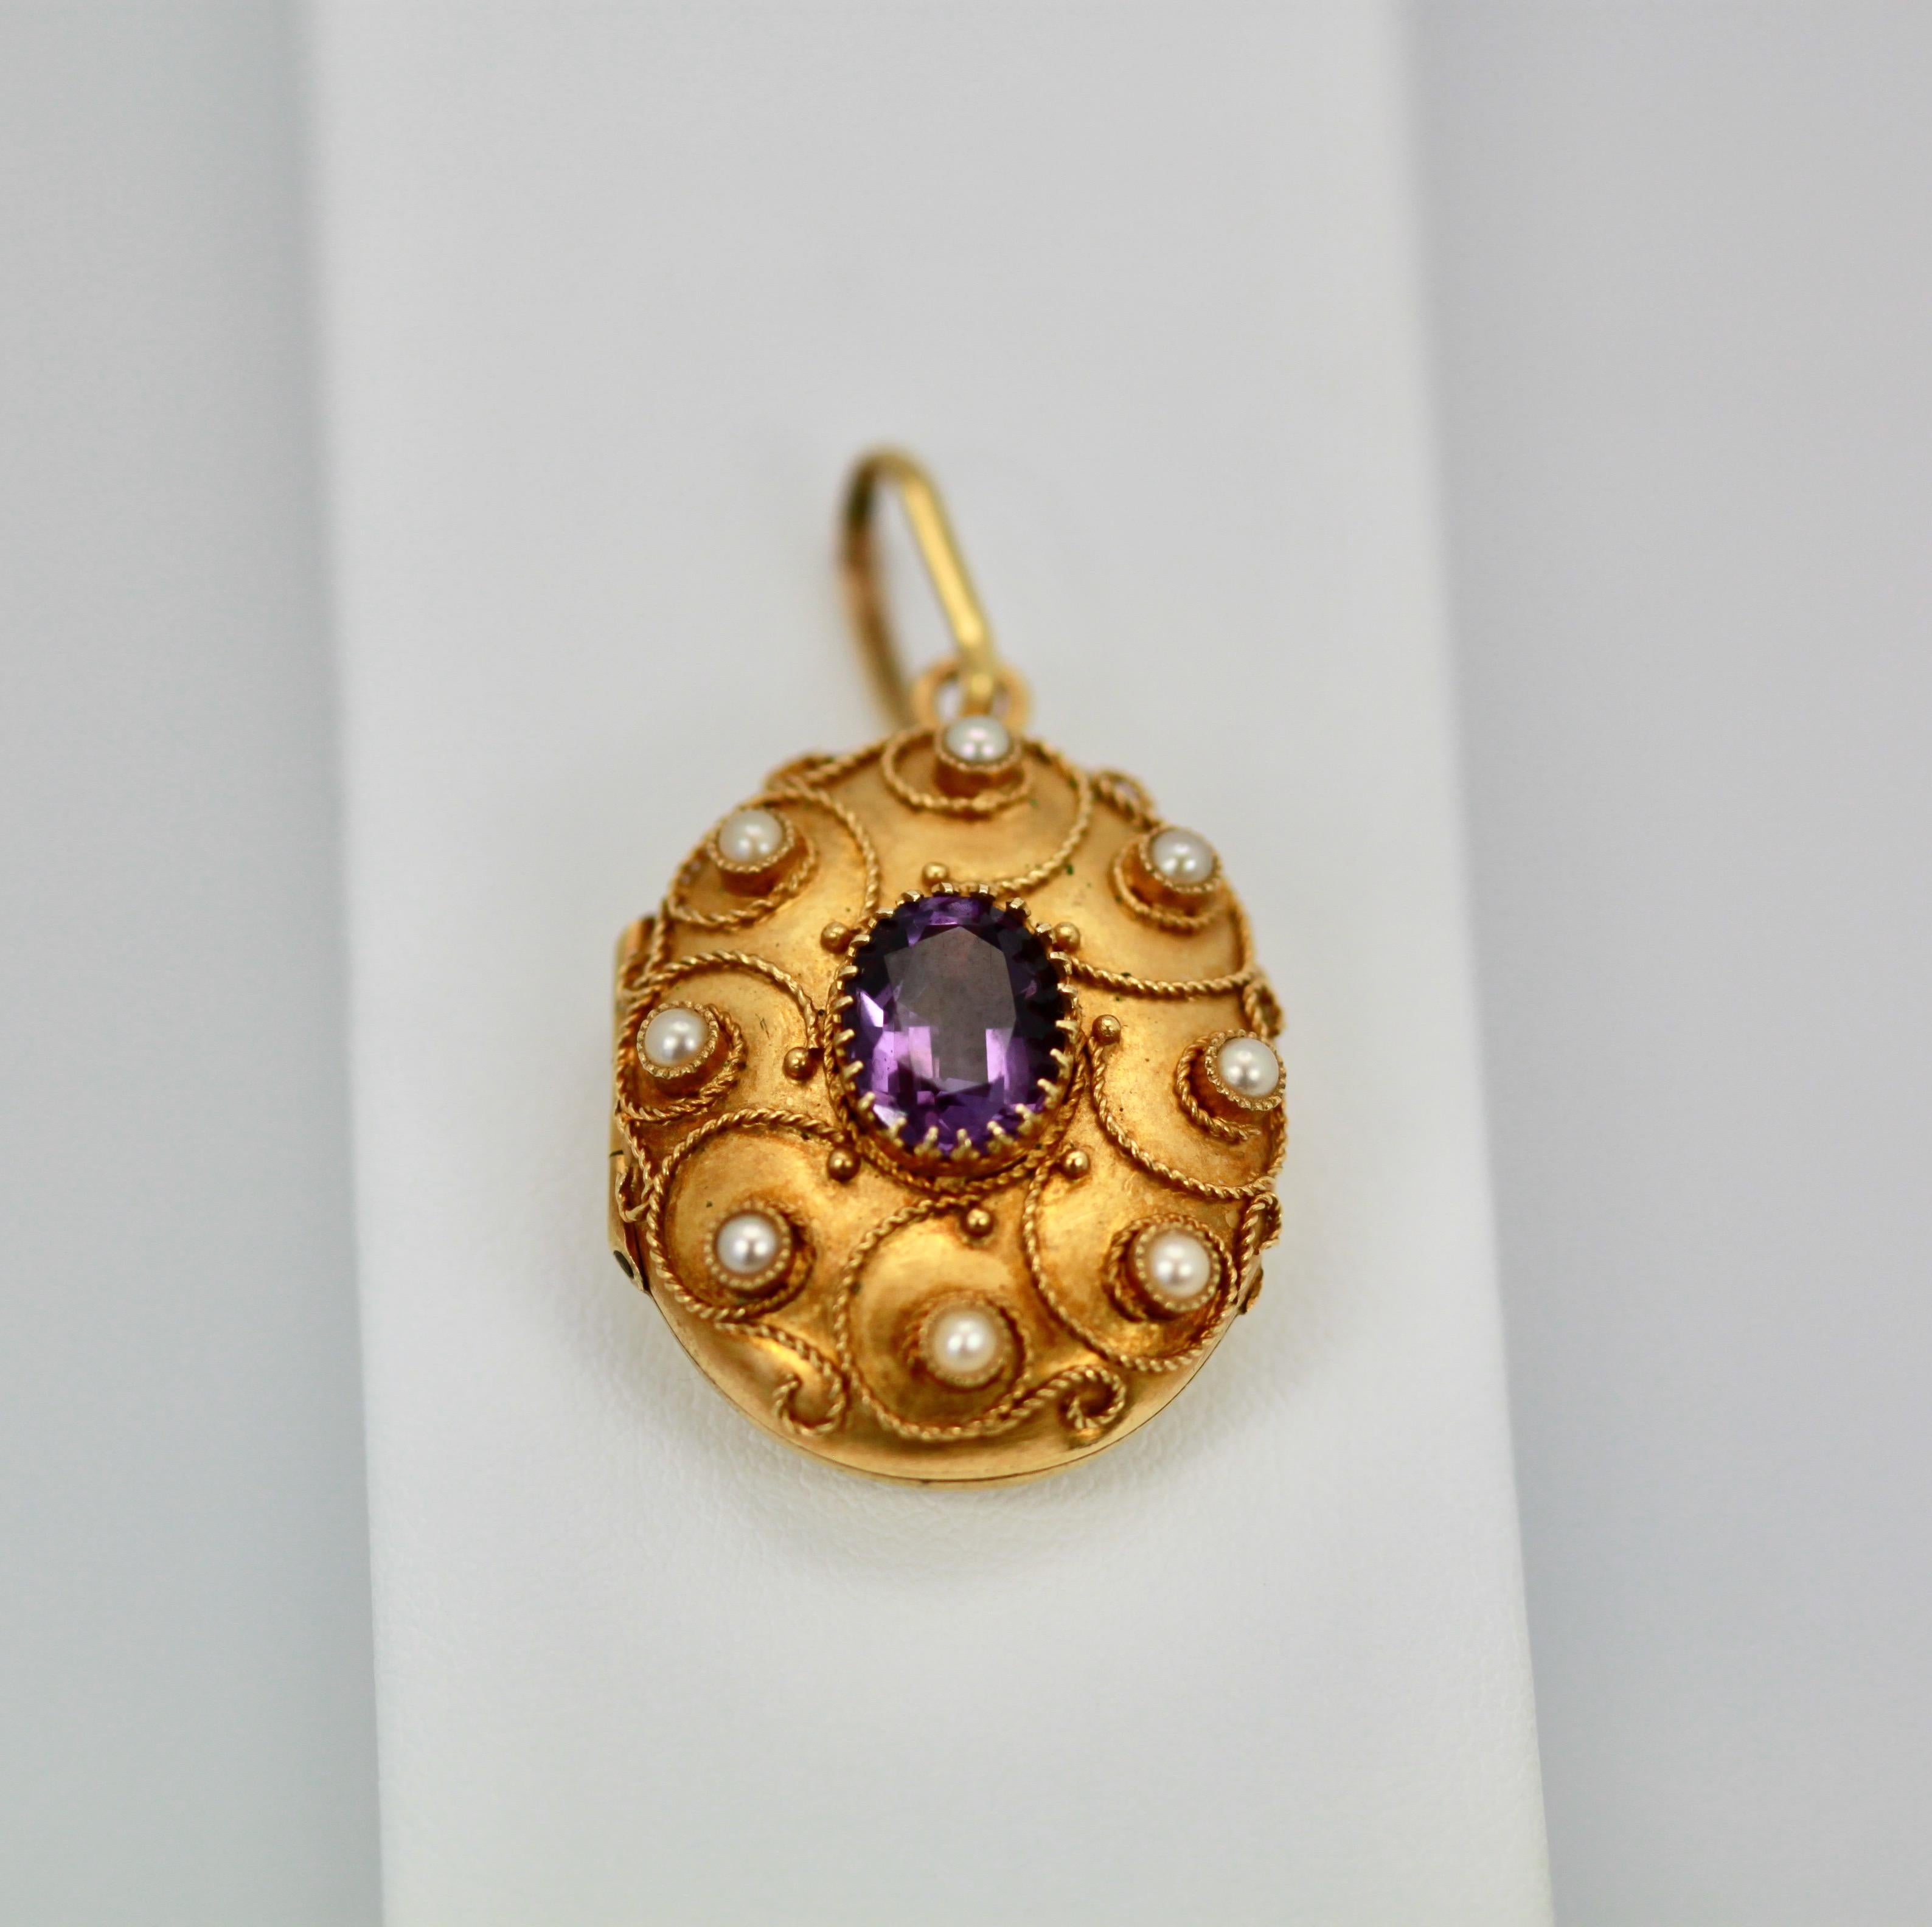 This lovely Amethyst Pearl Locket is from Austria and is done in 18K yellow Gold.
The front have beautiful filigree work with seed pearls surrounding the piece.  In the center is a beautiful Amethyst of approximately 1.50 carats.  There are 8 seed